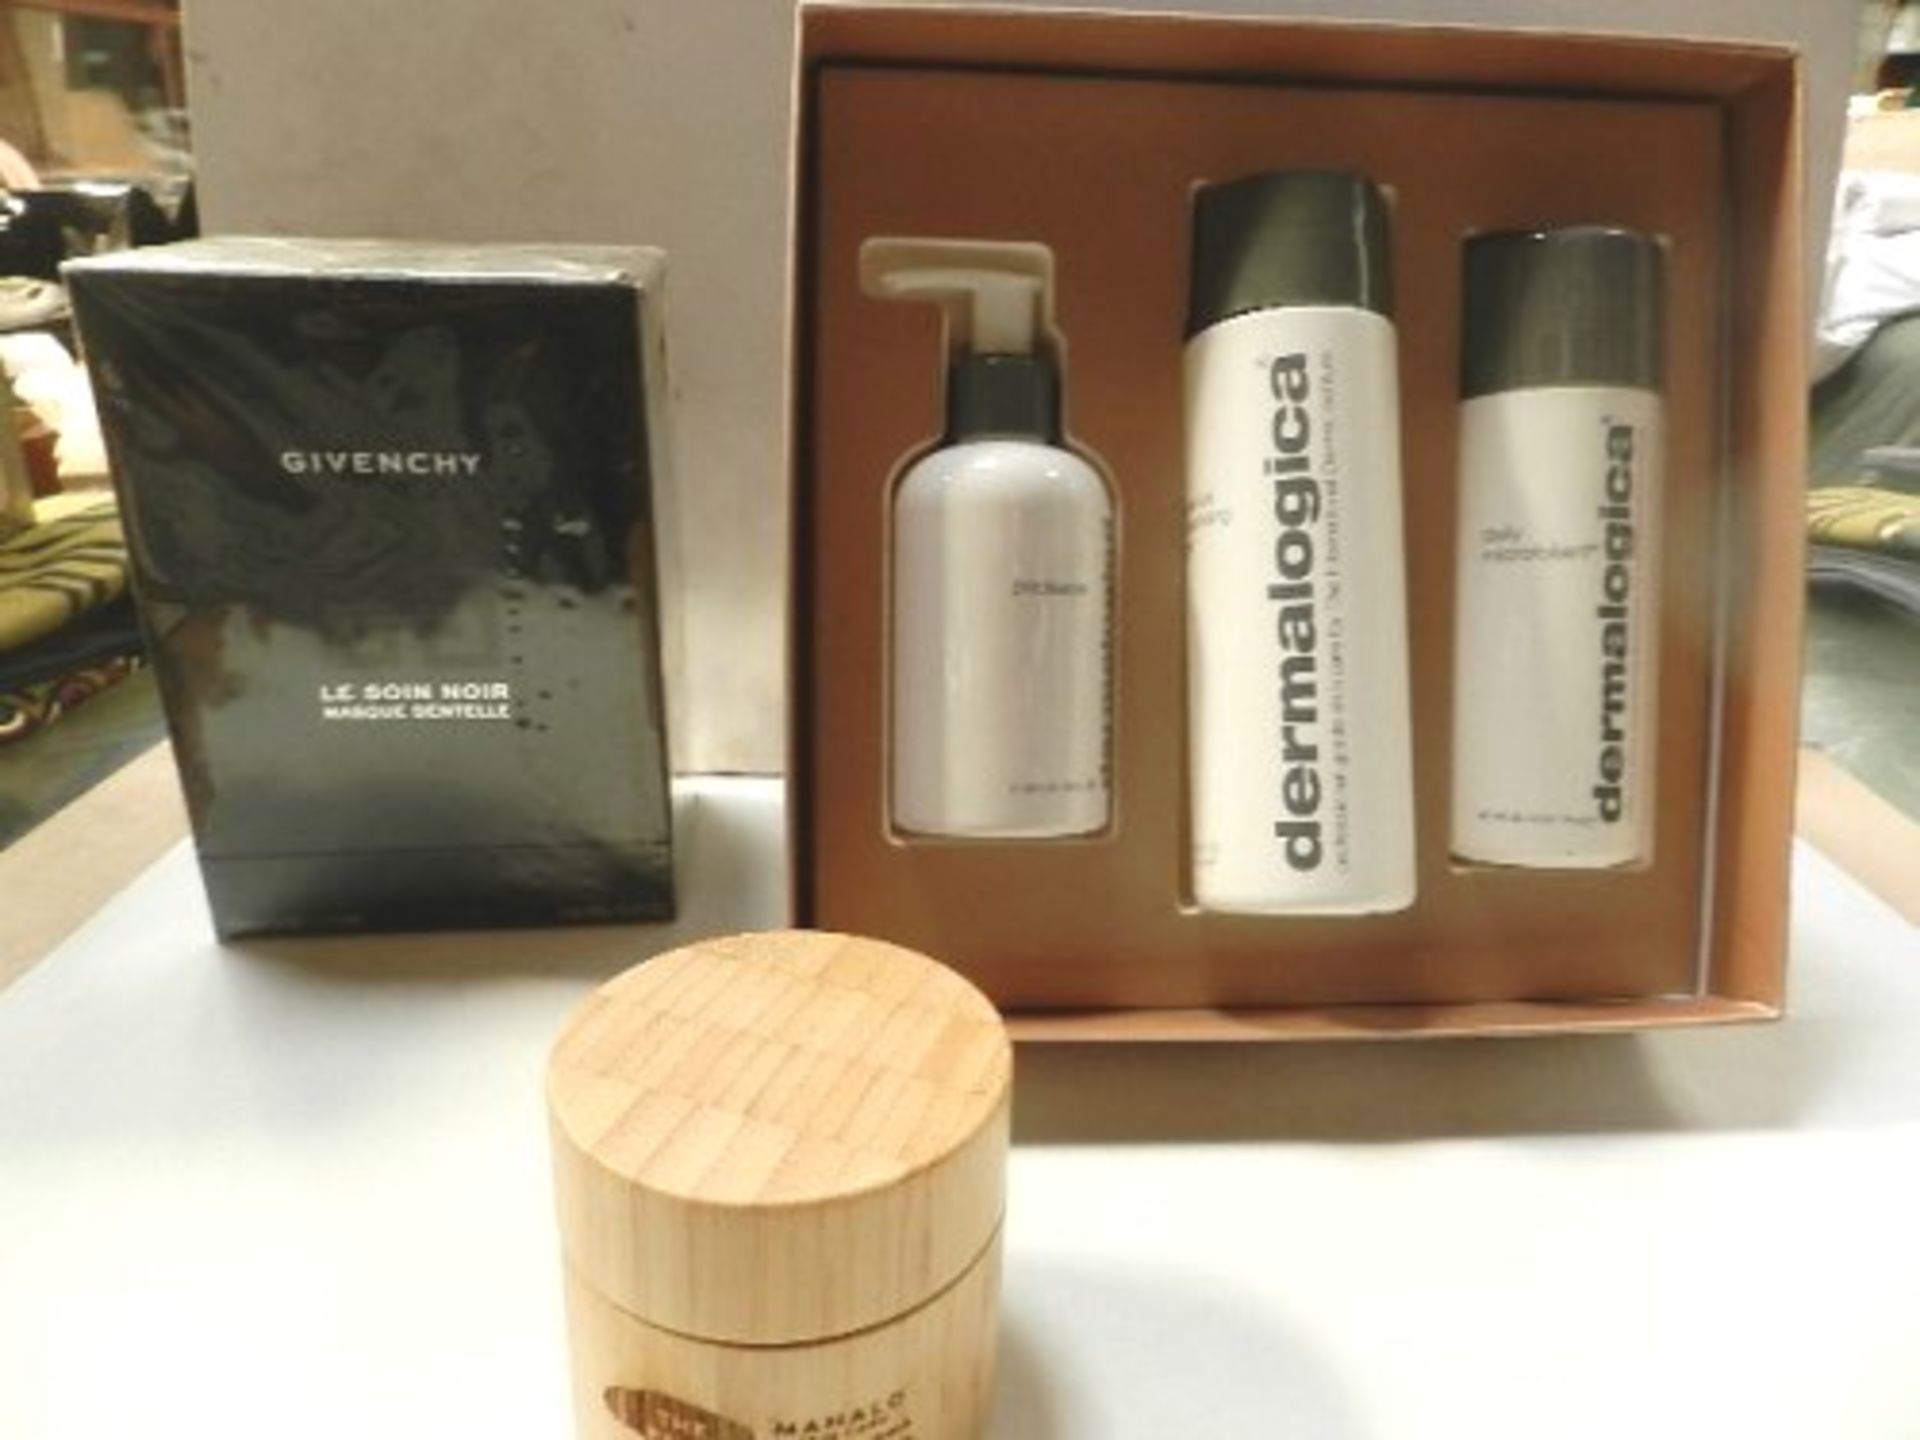 1 x Givenchy Le Soin 4 x lace mask, RRP £150.00, 1 x Dermalogica skin care set and 1 x Maholo